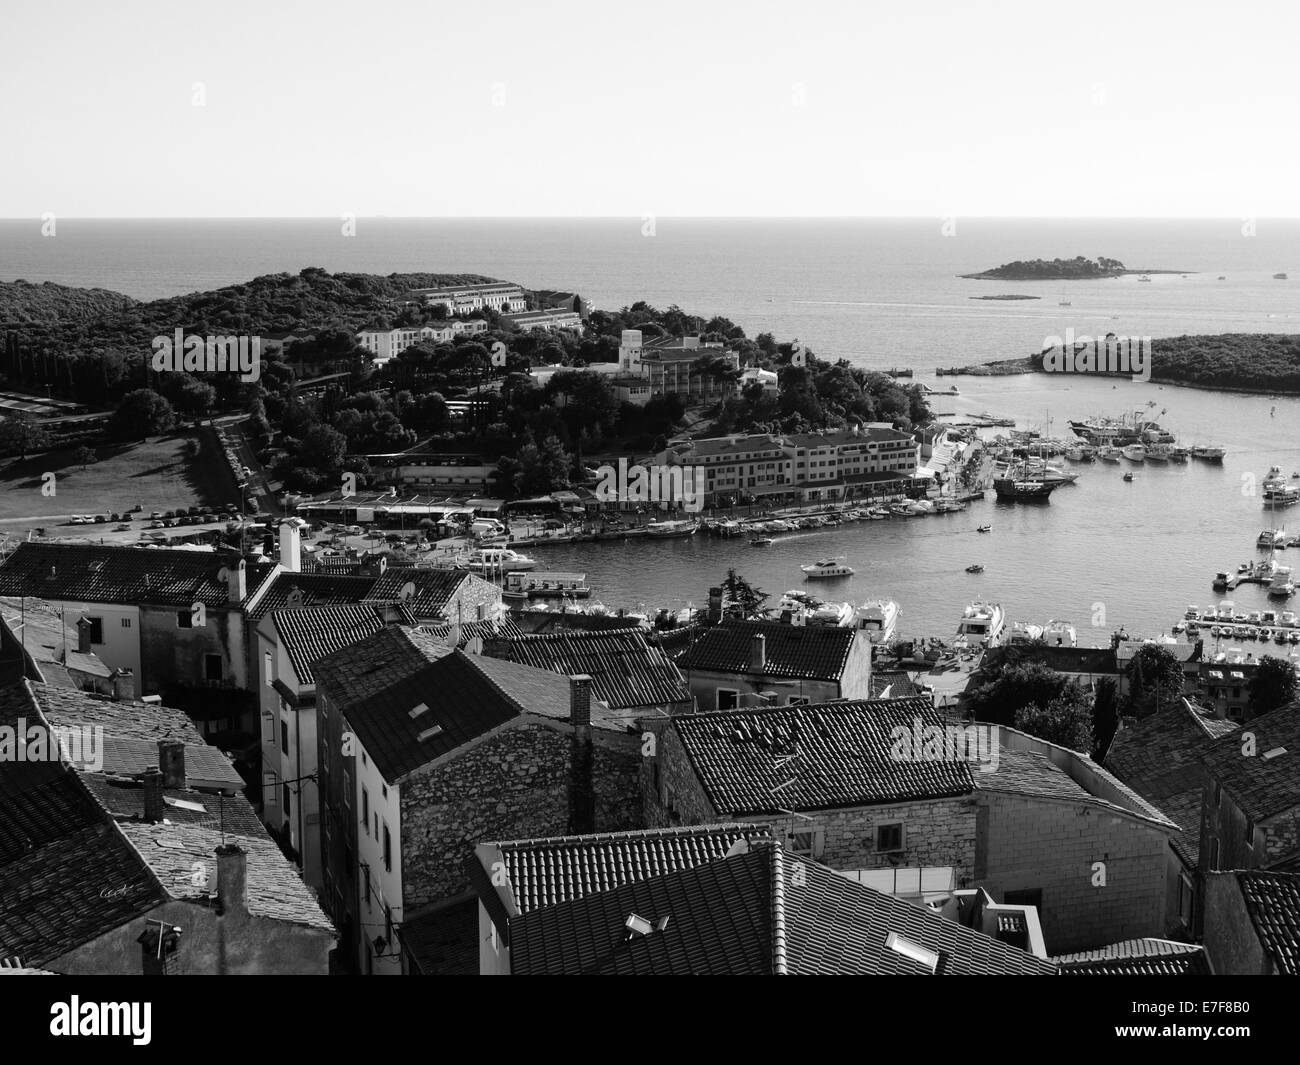 Vrsar port.  Both old and new city can be seen, along with parked boats and yachts Stock Photo